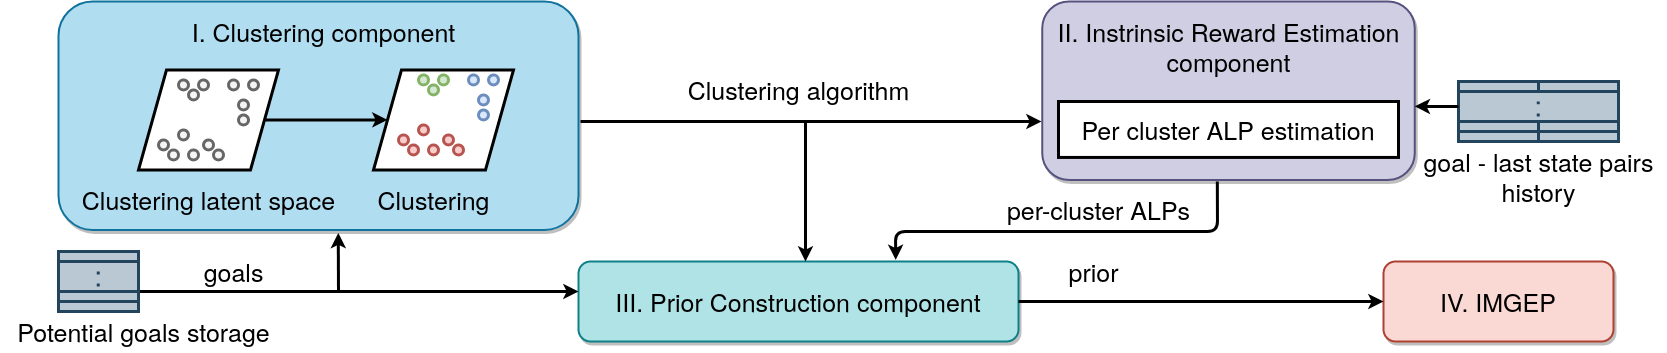 Goal sampling procedure in the GRIMGEP framework.
1) The goal space is clustered.
2) The absolute learning progress (ALP) of each cluster is computed.
3) A cluster is sampled using the ALP estimates. The goal sampling prior is then constructed as the masking distribution assigning a uniform probability over goals inside the sampled cluster and 0 probability to goals outside the cluster.
4) A goal is sampled from the distribution formed by combining the goal sampling prior and the underlying IMGEP's goal sampling distribution.